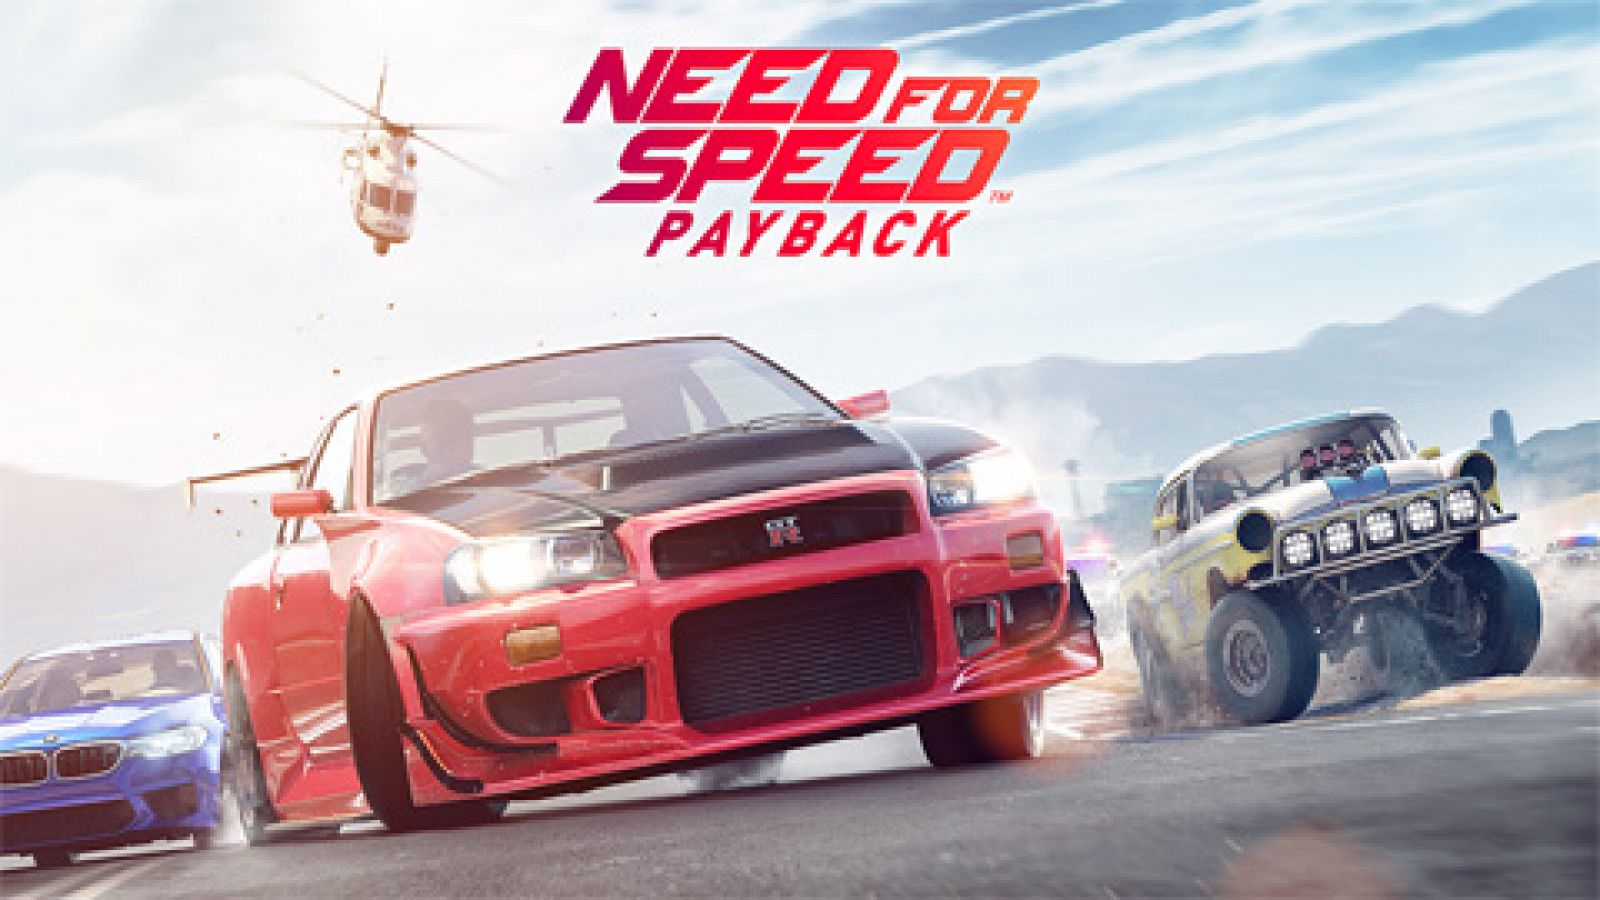 Tráiler 'Need for Speed Payback' (videojuego)